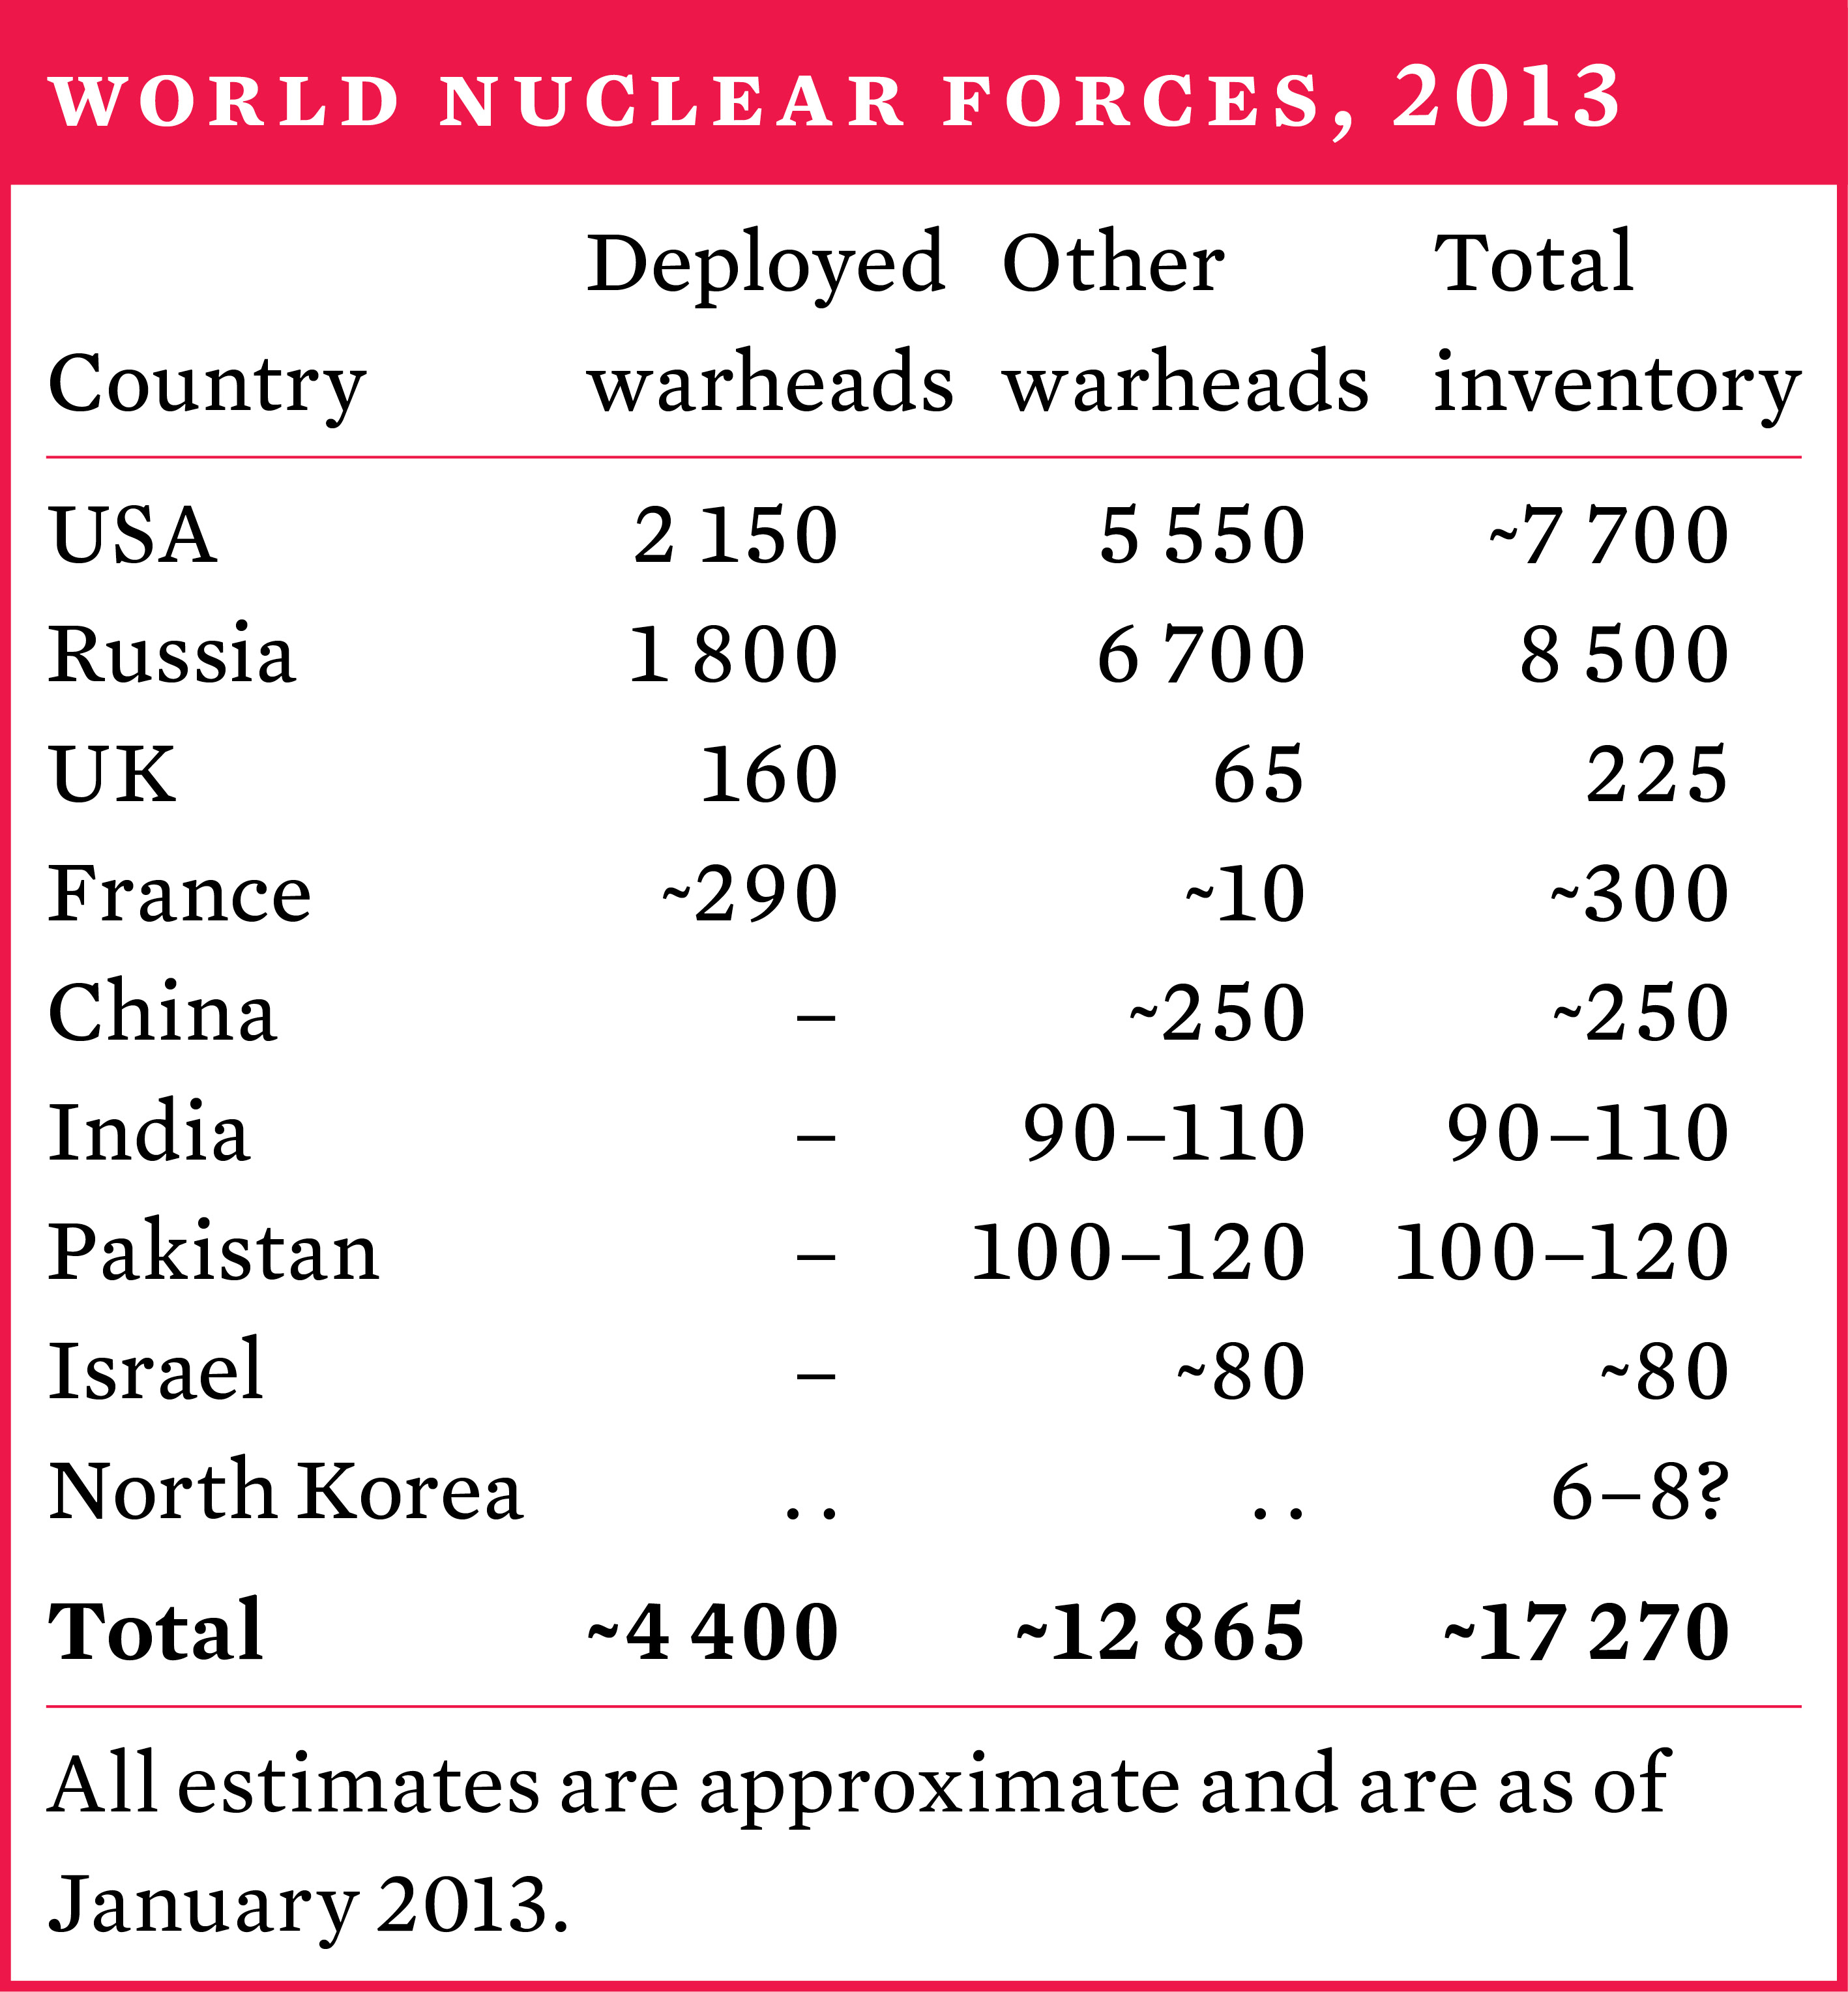 World nuclear forces, 2013